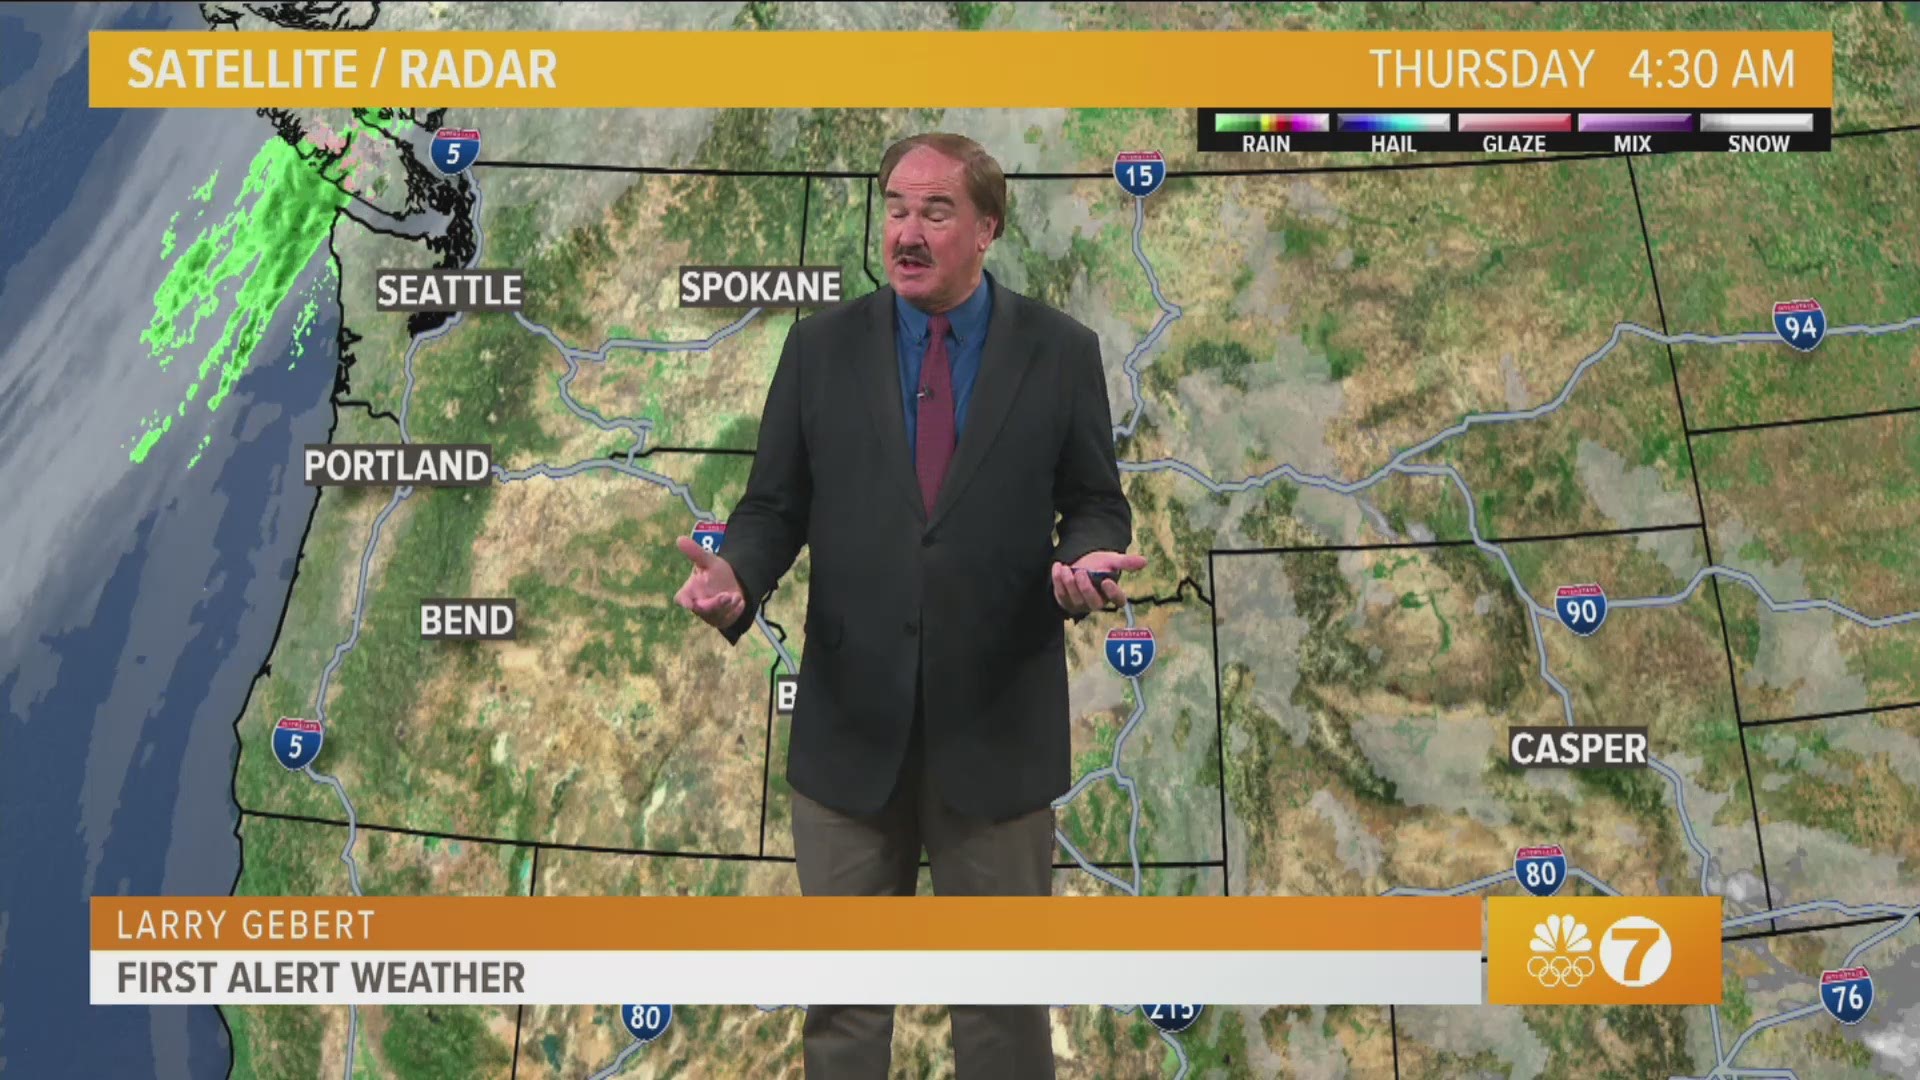 Larry Gebert says it will a nice day with sunny skies and highs around 50 degrees.